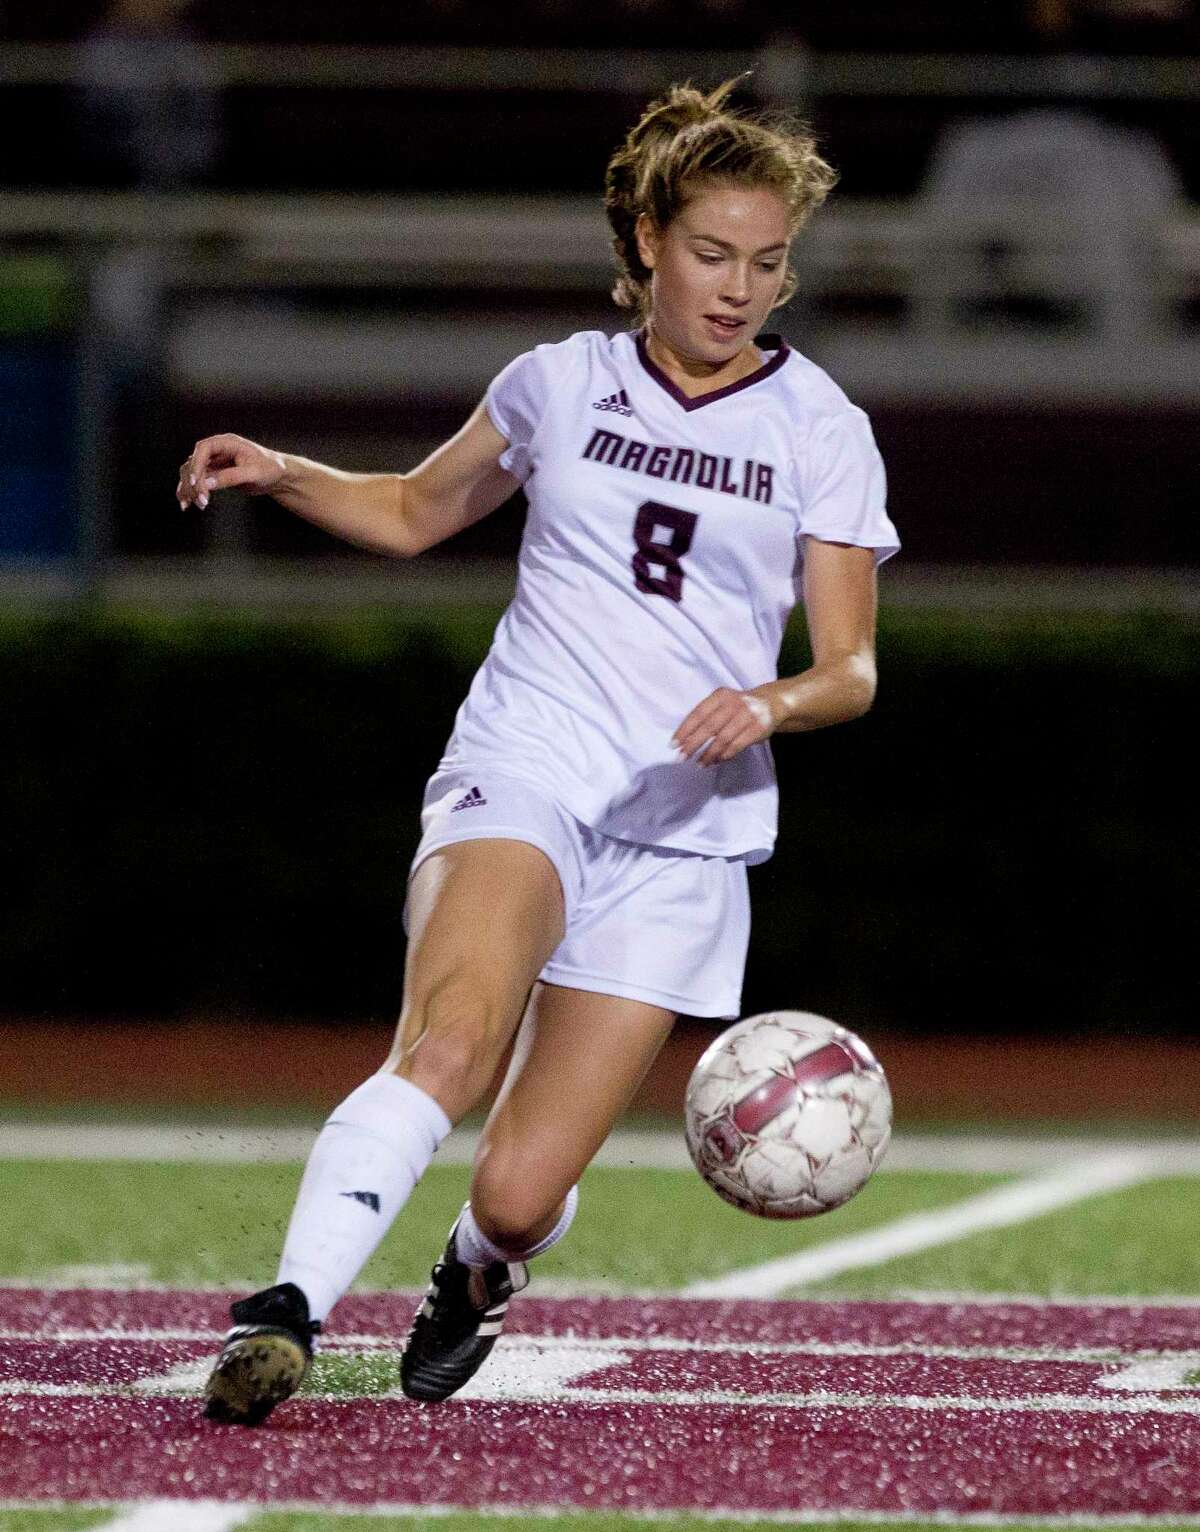 Magnolia midfielder Brooke Mallory (8) dribbles the ball during the first period of a District 20-5A high school girls soccer match at Magnolia High School Friday, Feb. 3, 2017, in Magnolia. Magnolia defeated Tomball Memorial 3-0.